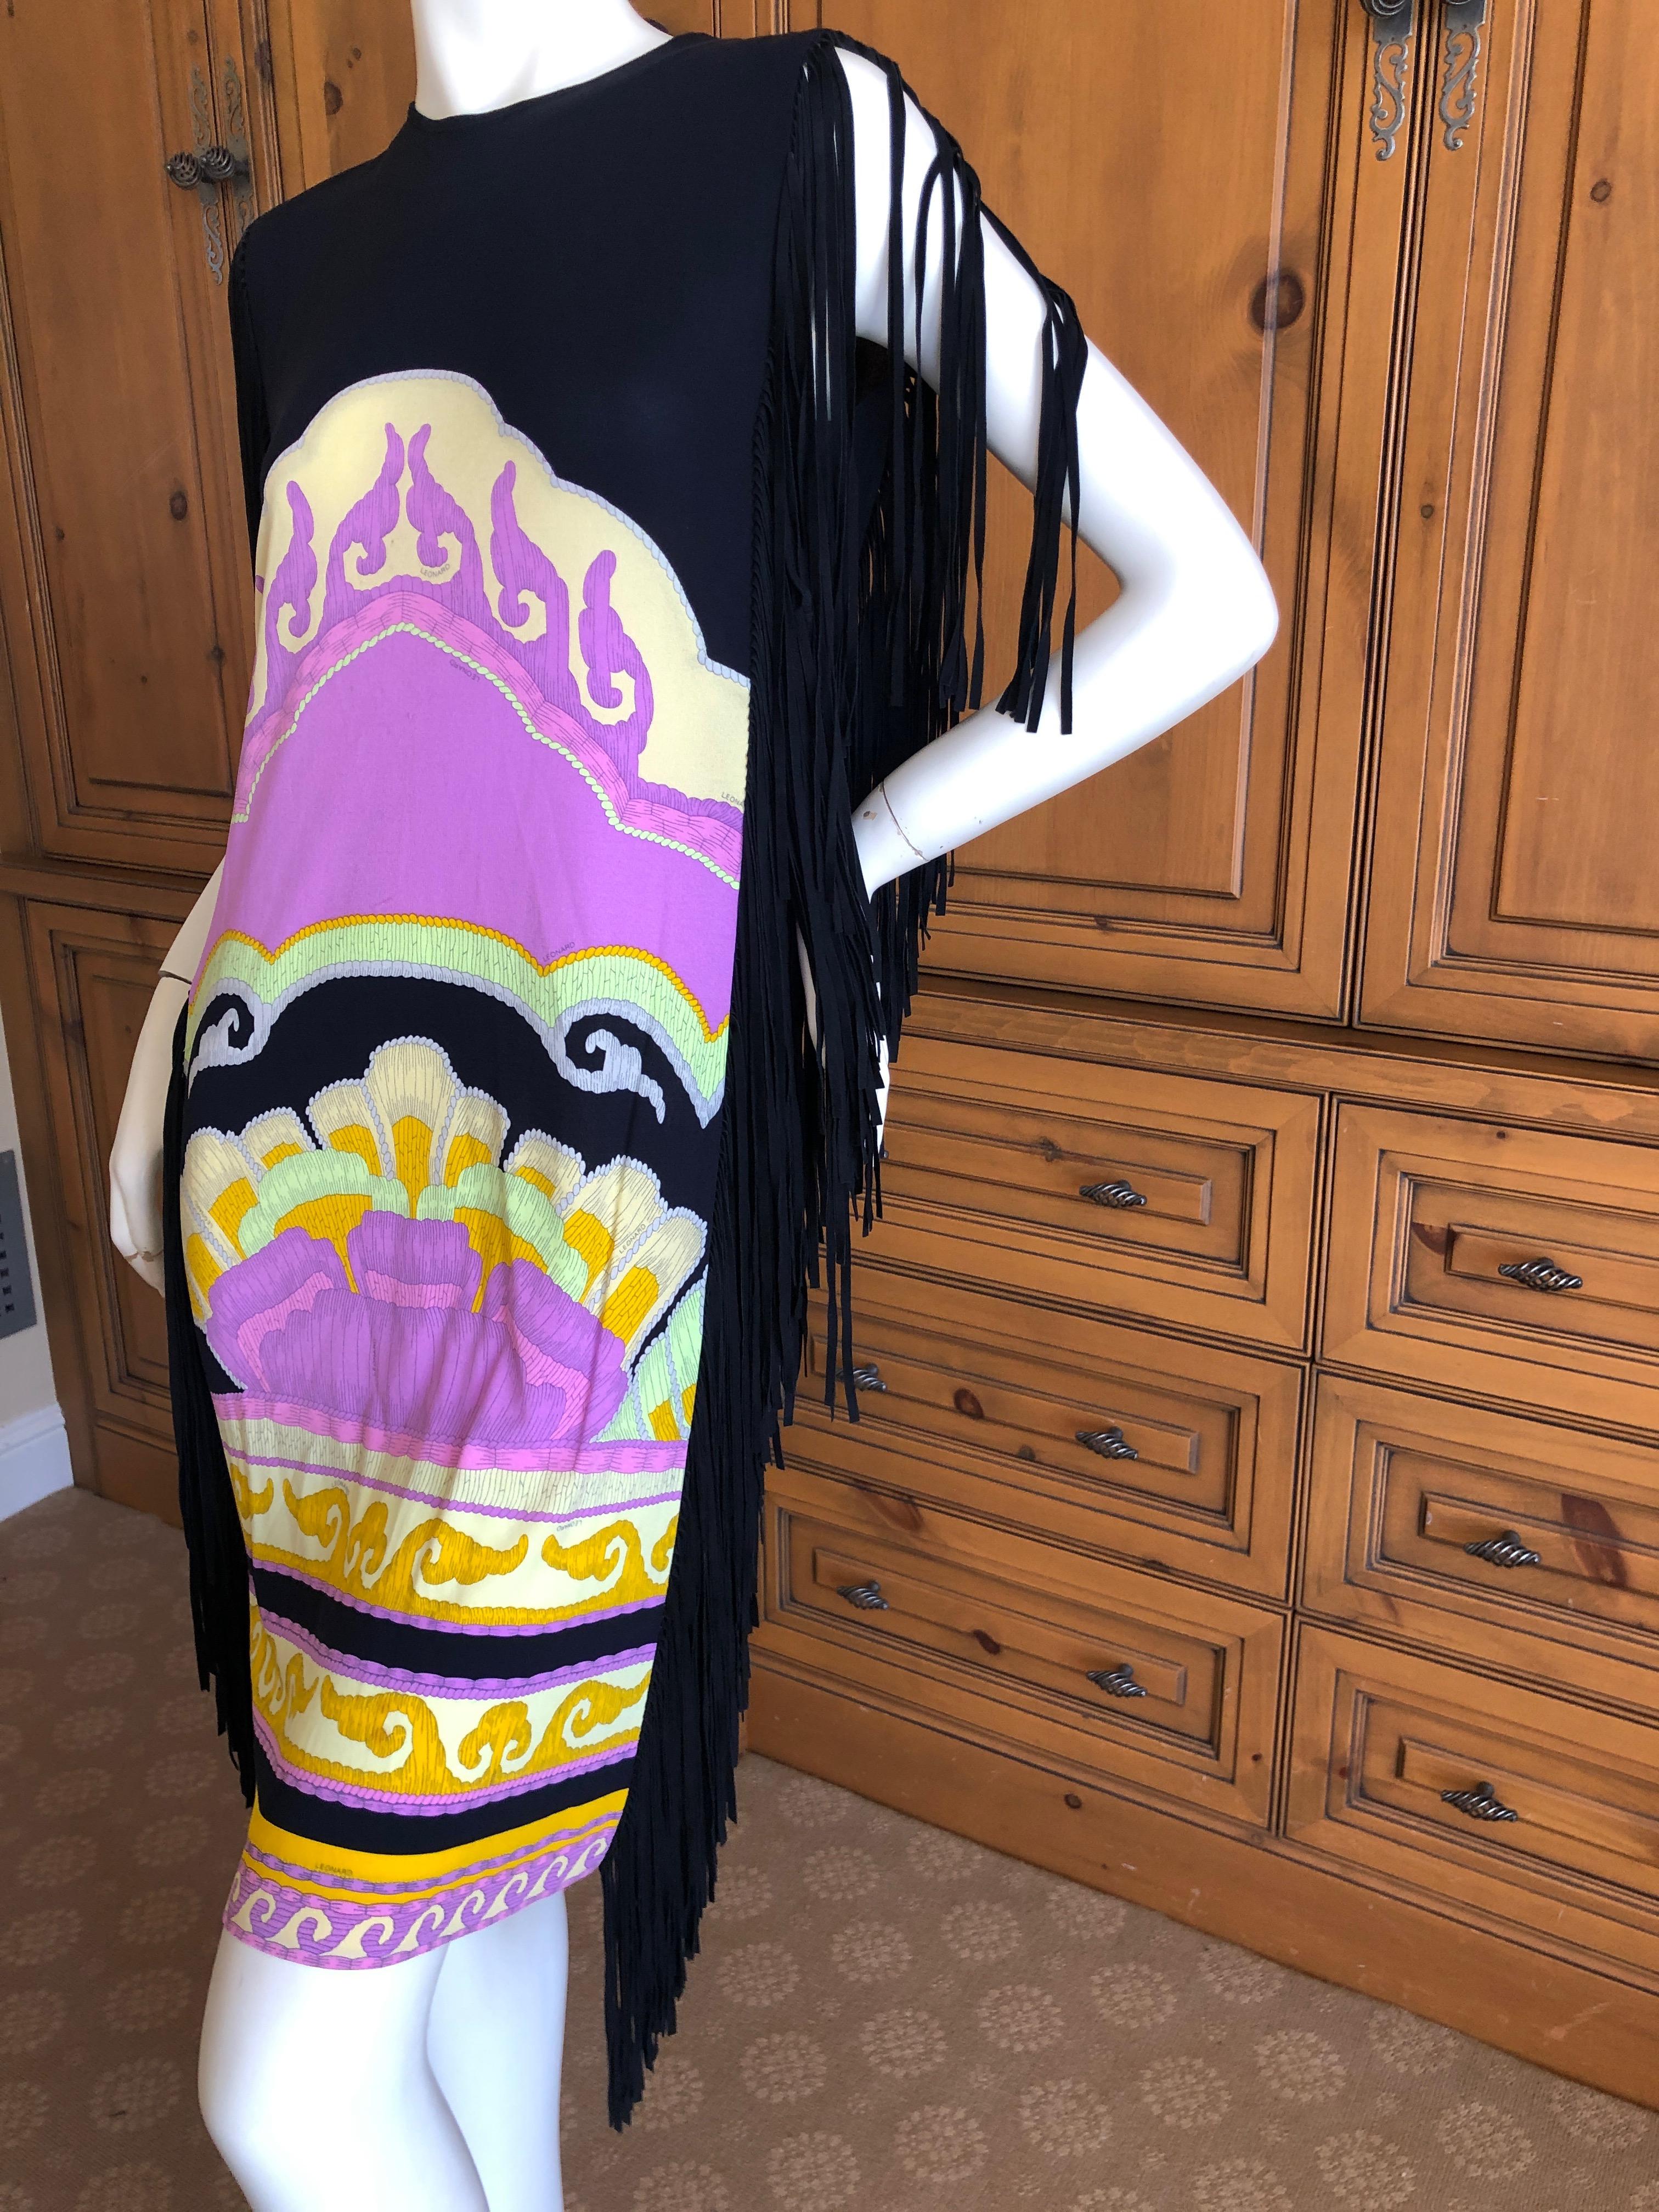 Leonard Paris Vintage Silk Jersey Sleeveless Dress with Suede Fringe Details.
There is also a belt with suede fringe.
Leonard Paris was a contemporary of Pucci, both houses creating brilliant 60's patterns on silk jersey.
 Both were very expensive,